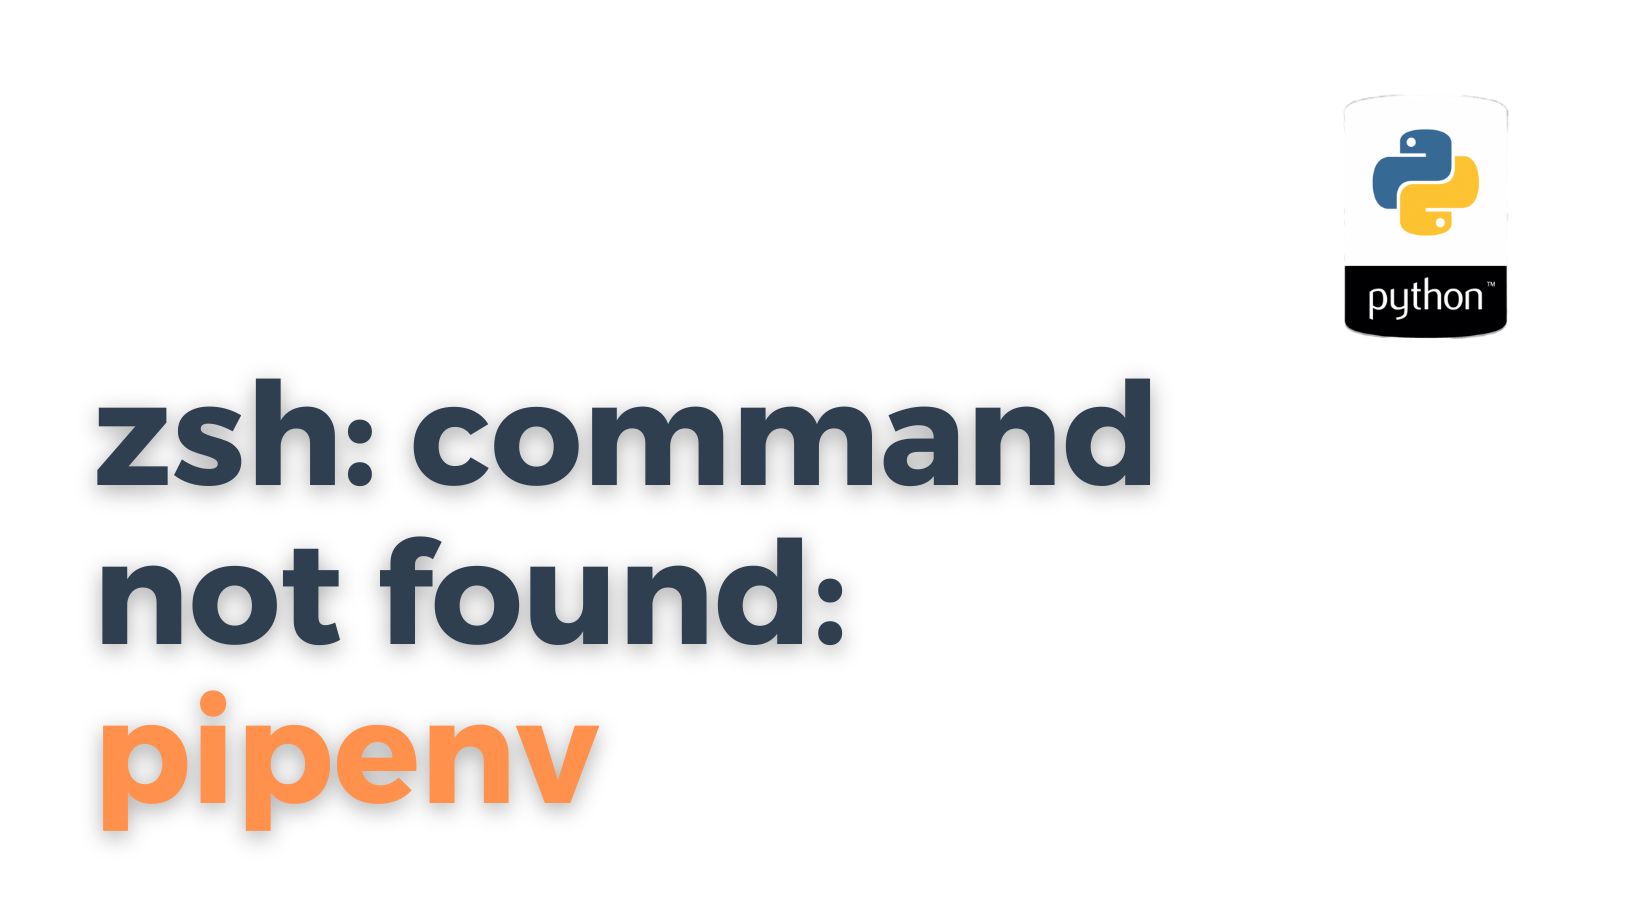 zsh: command not found: pipenv